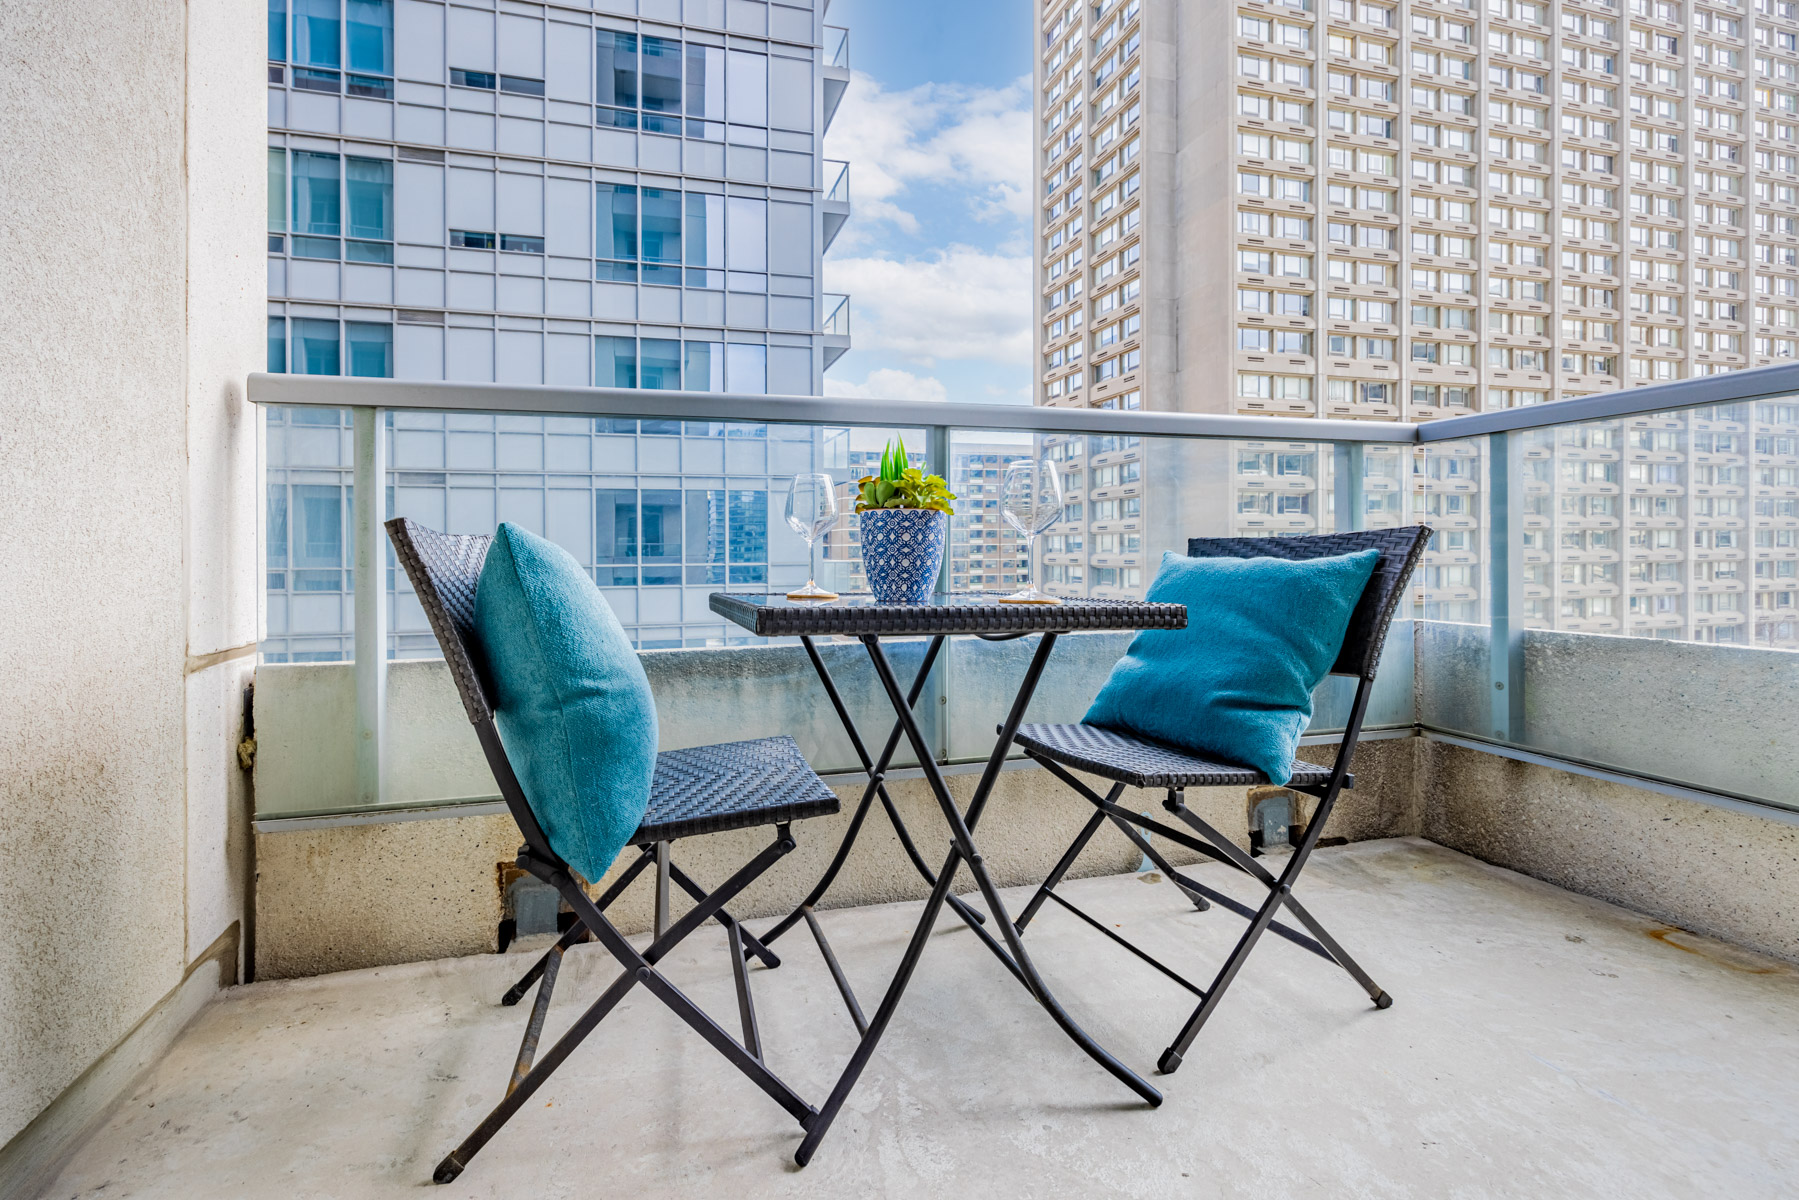 Condo balcony with 2 chairs and table with wine glasses.